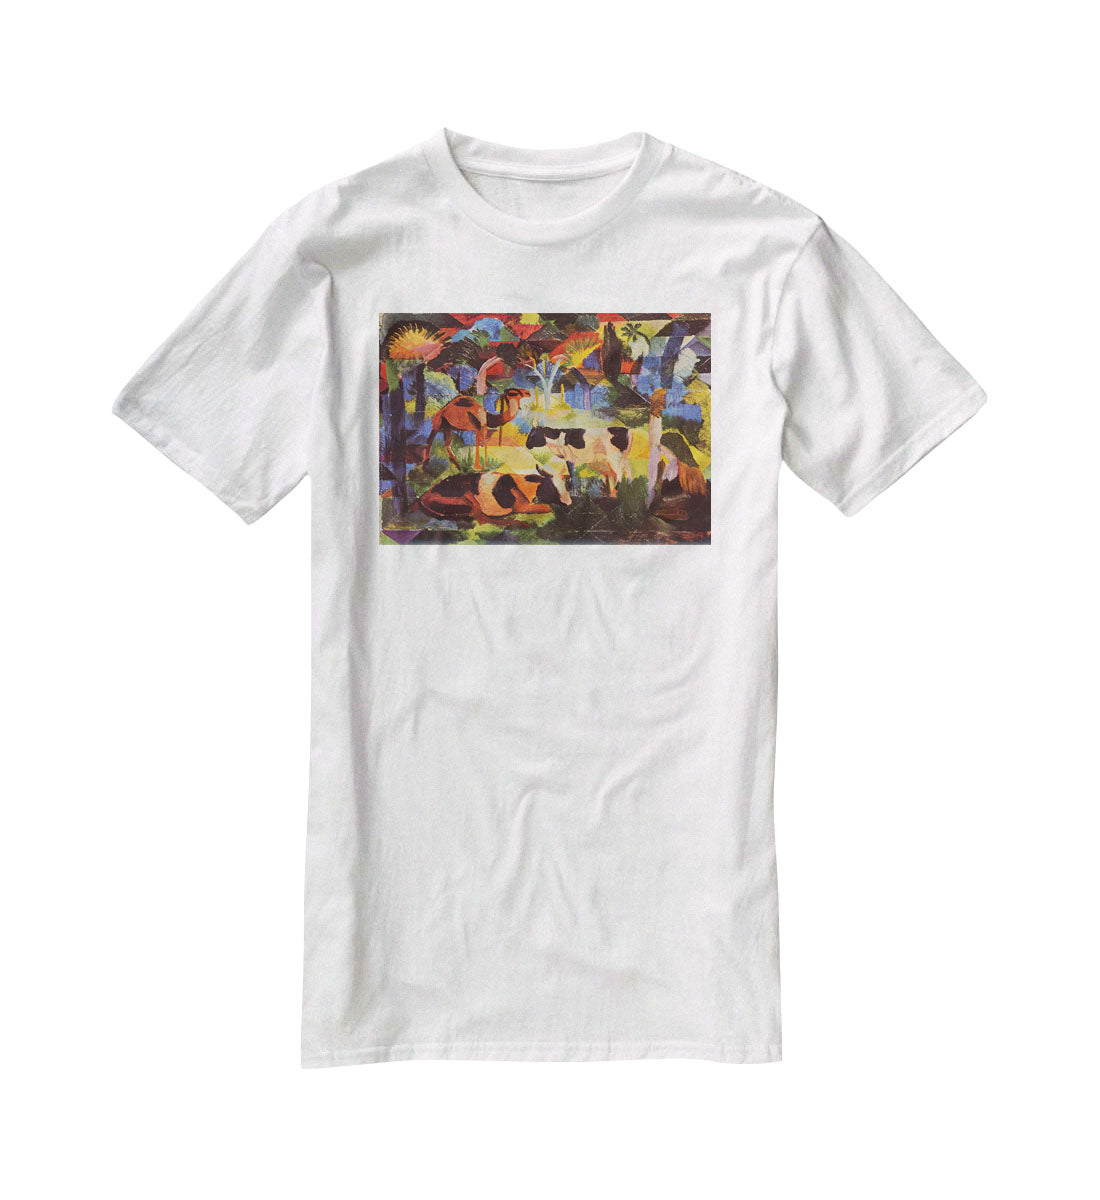 Landscape with cows and camels by Macke T-Shirt - Canvas Art Rocks - 5